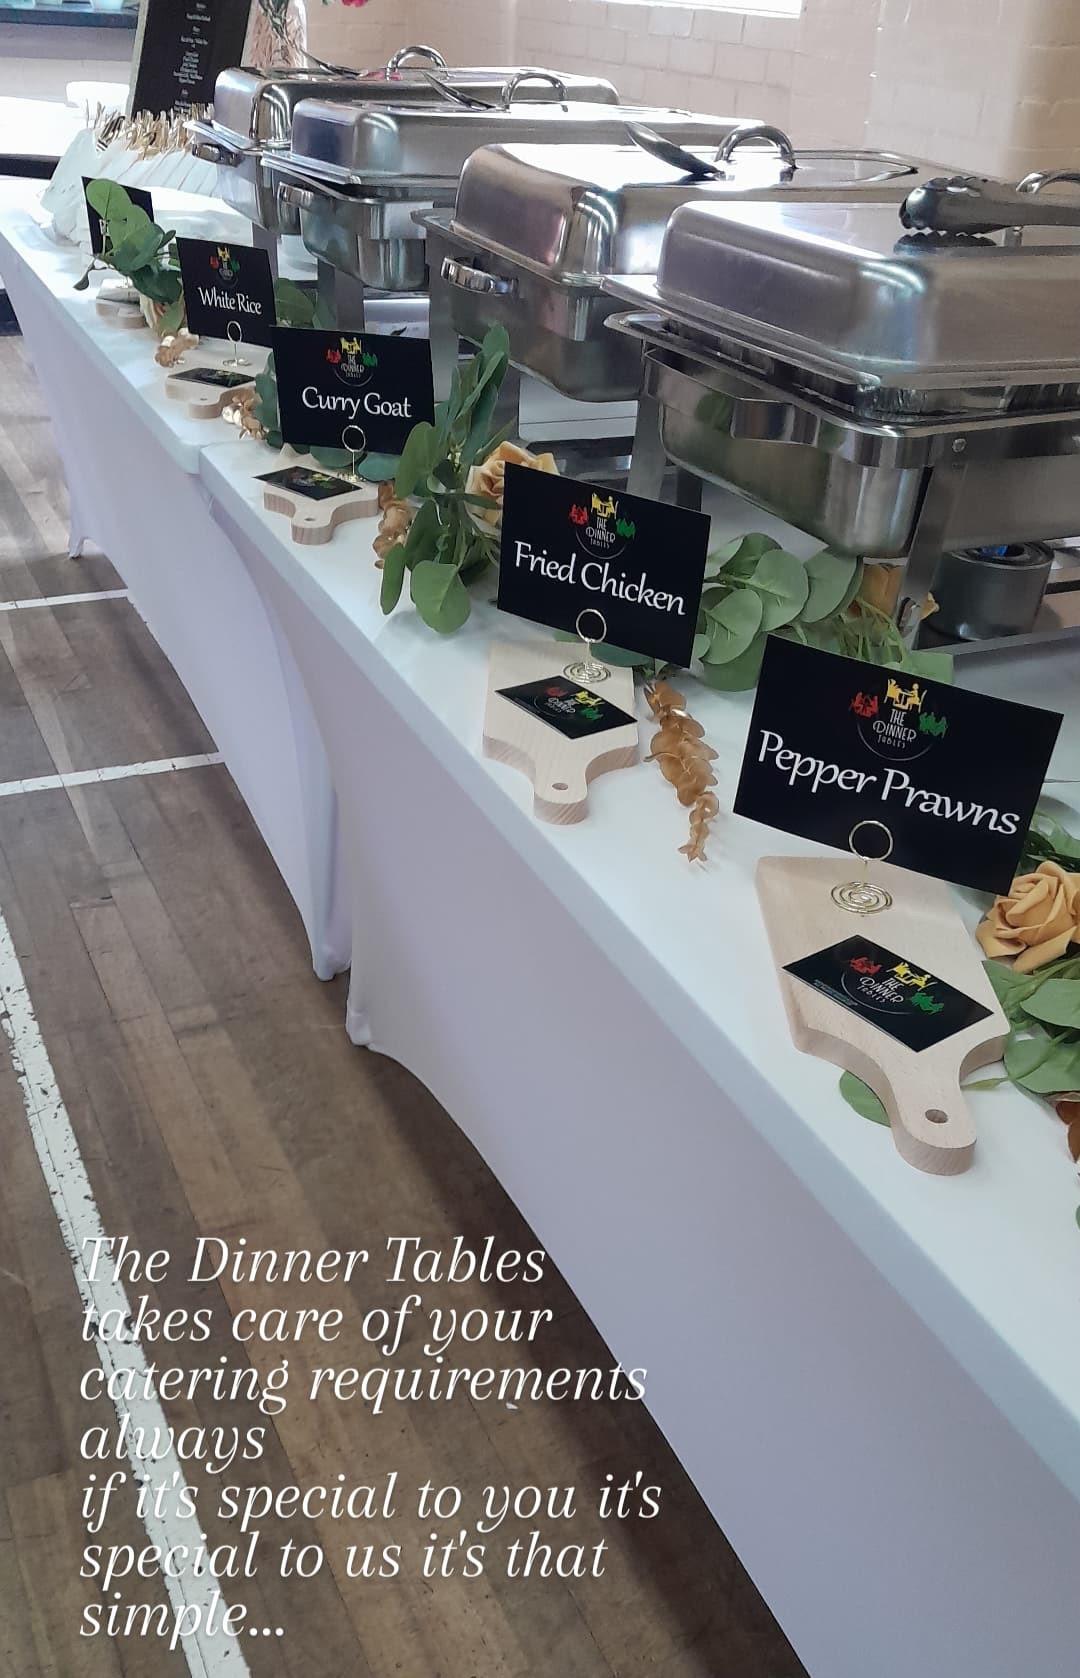 Caribbean Caterers in Croydon and Surrey